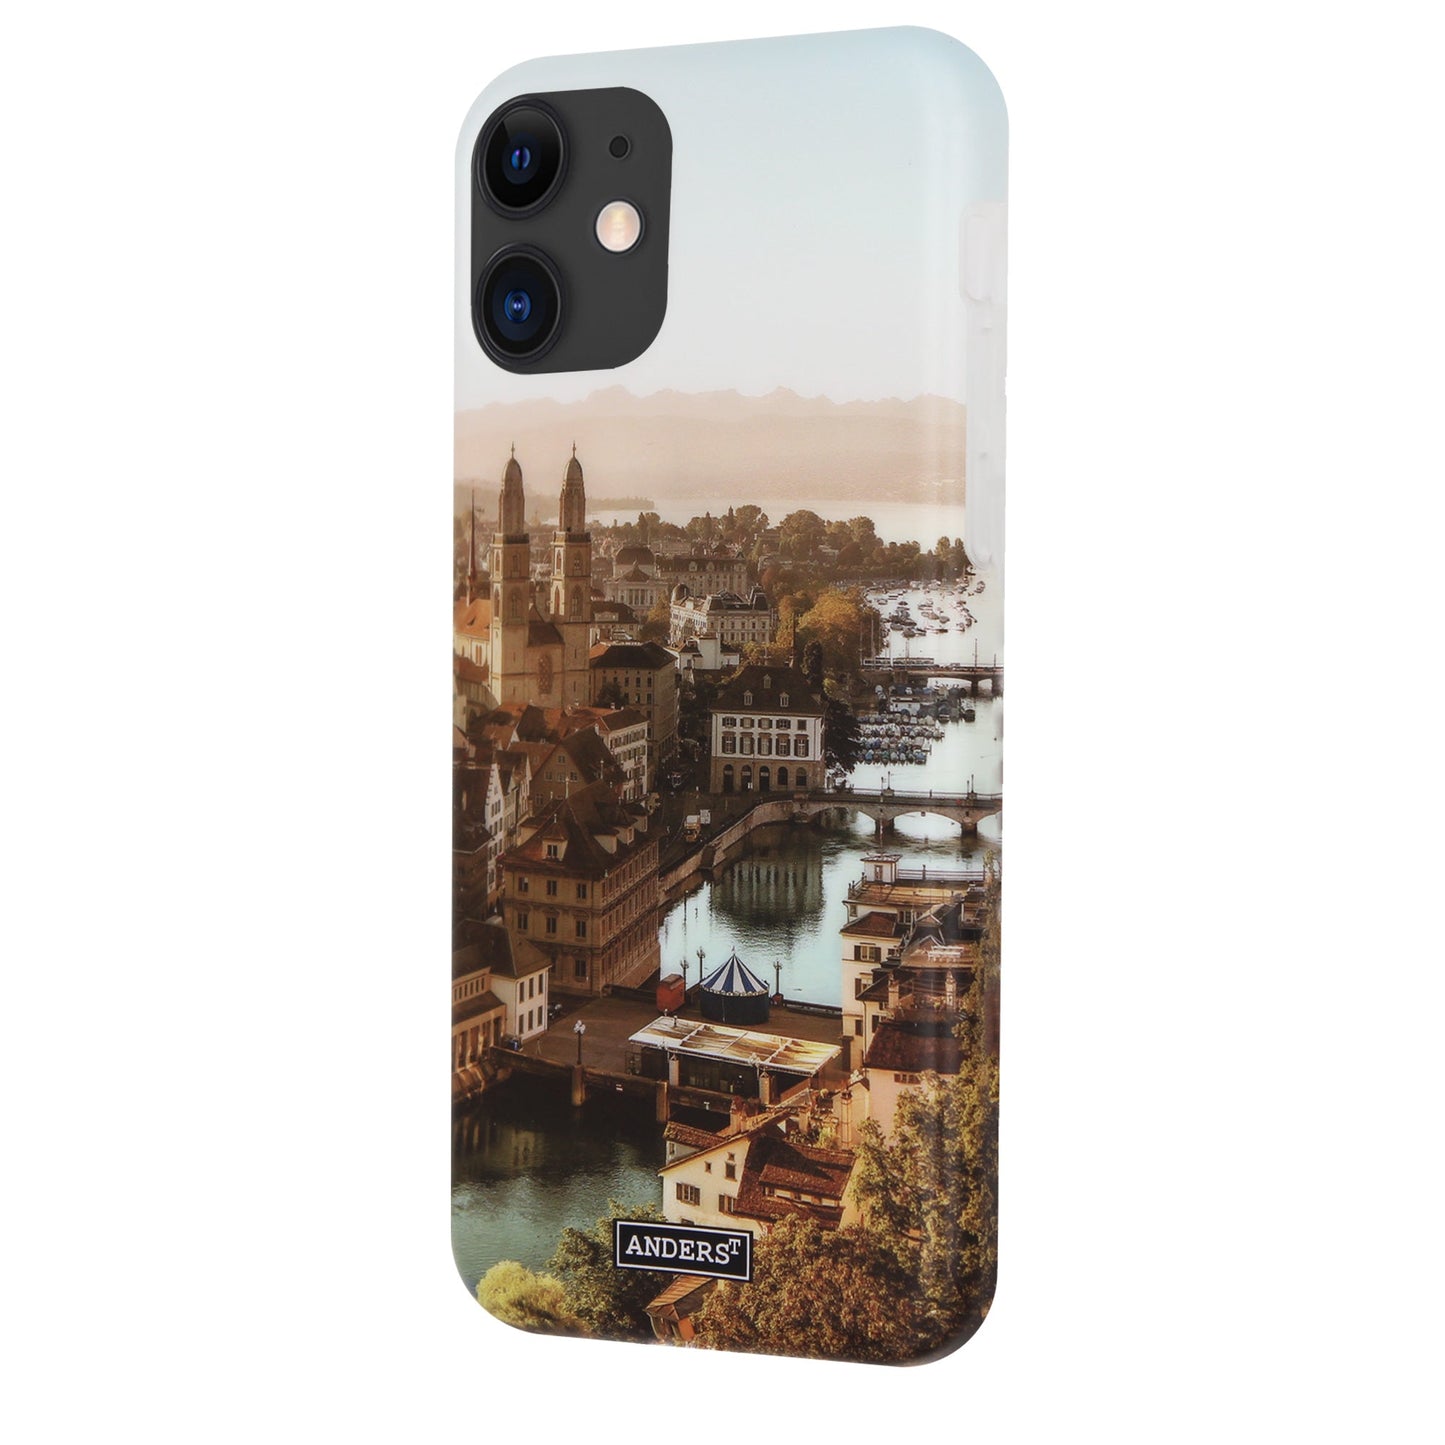 Zurich City from Above 360° Case for iPhone 11